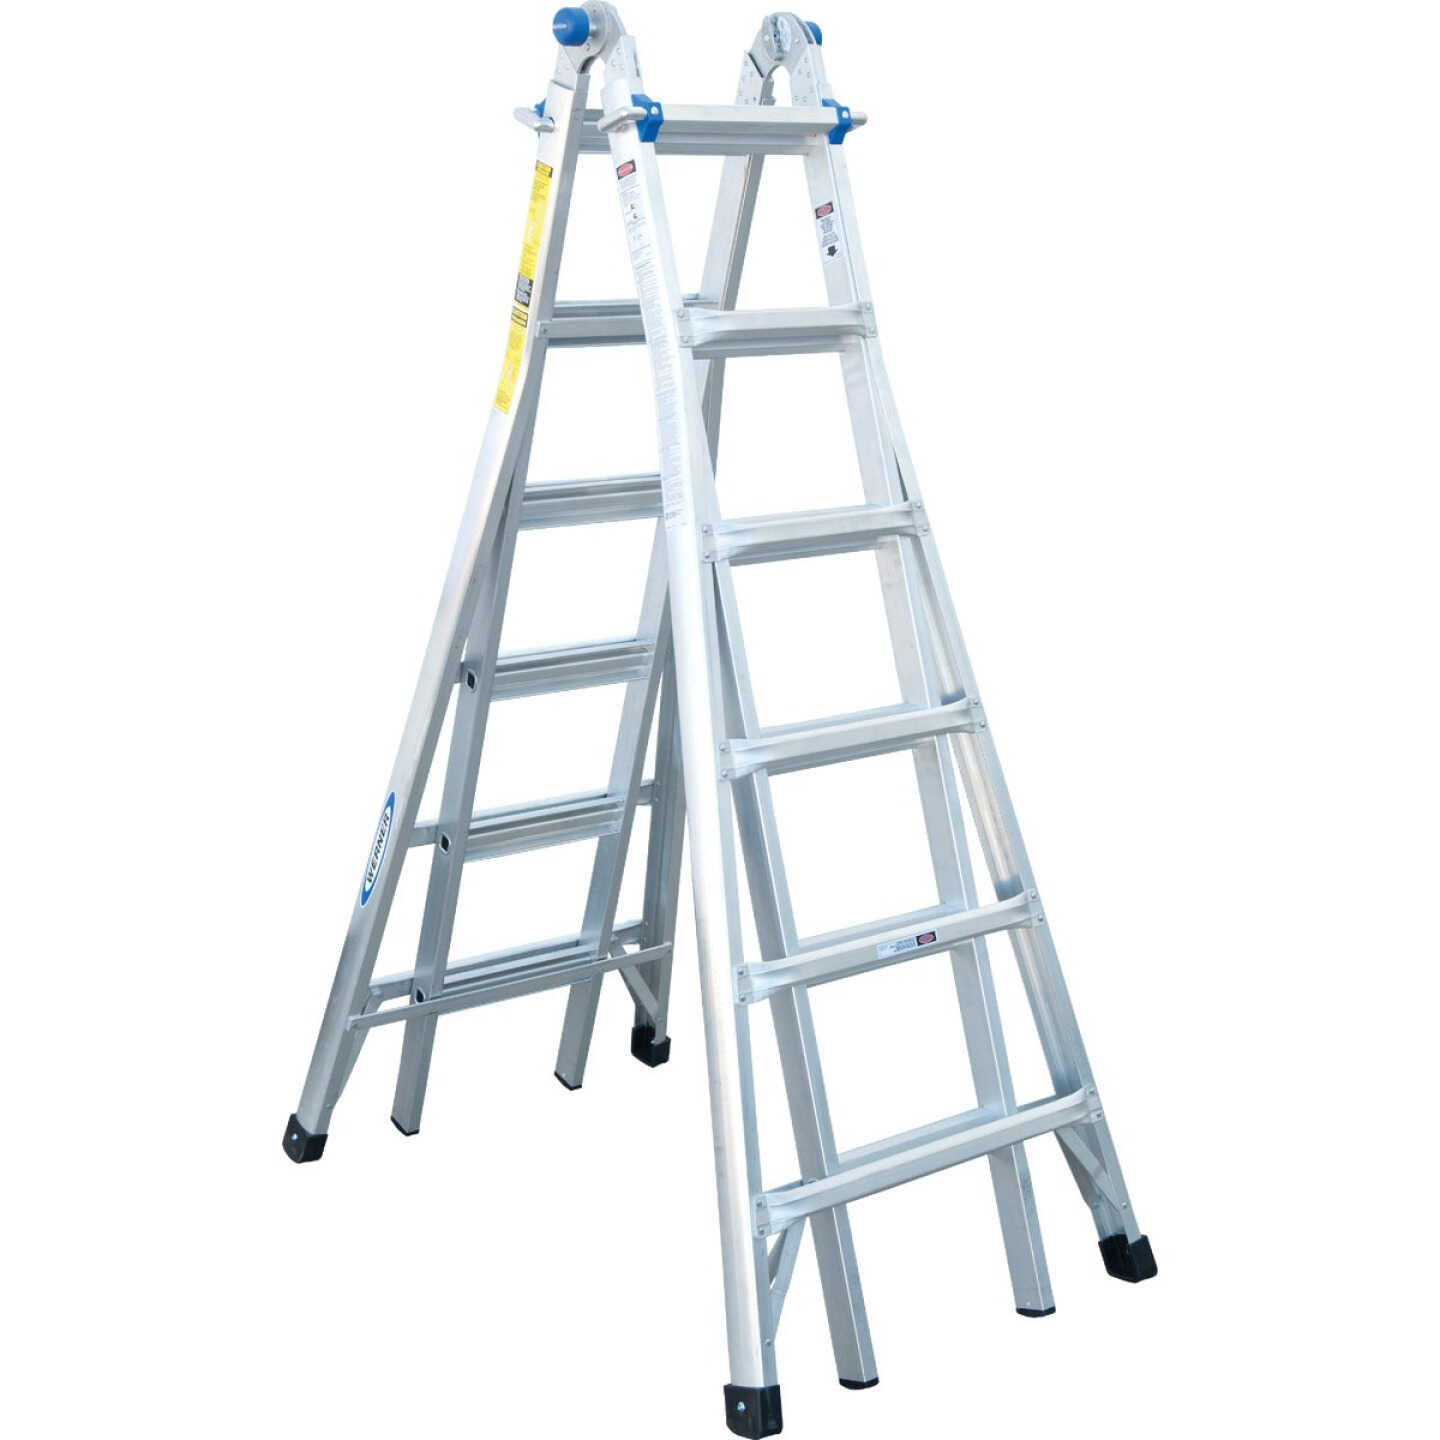 Werner 23 Ft. Aluminum Multi-Position Telescoping Ladder with 300 Lb. Load Capacity Type IA Ladder Rating Image 12